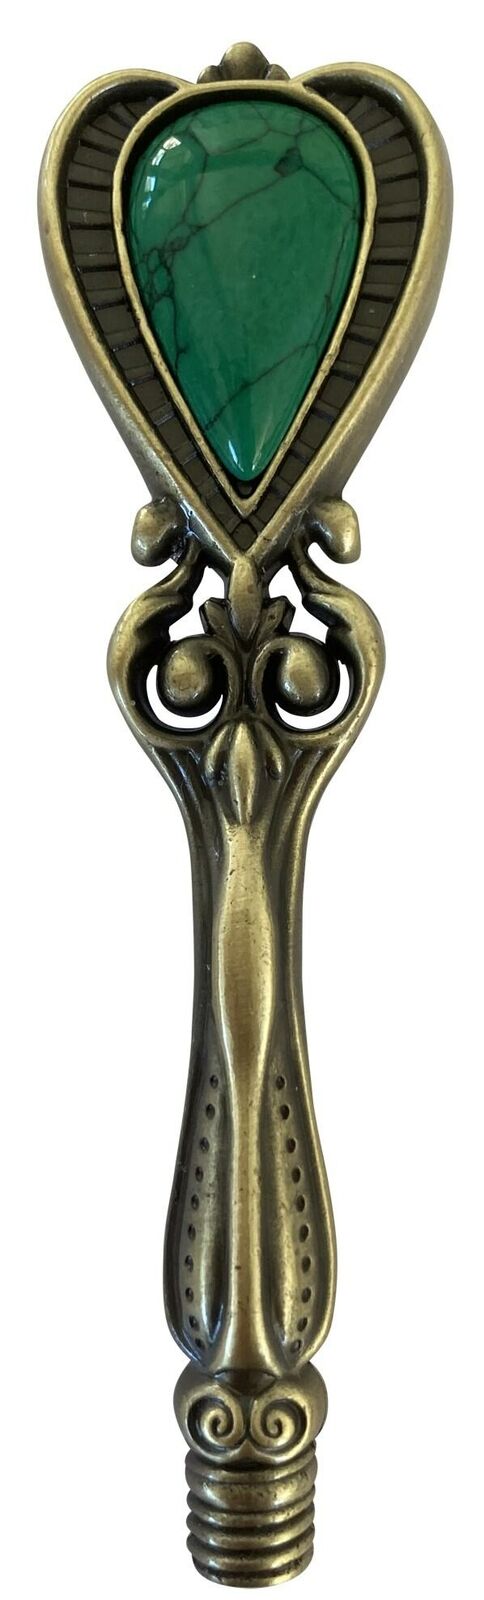 Green Sceptre-style wax seal stamp handle, 3" tall Antique Brass tone, Gorgeous!